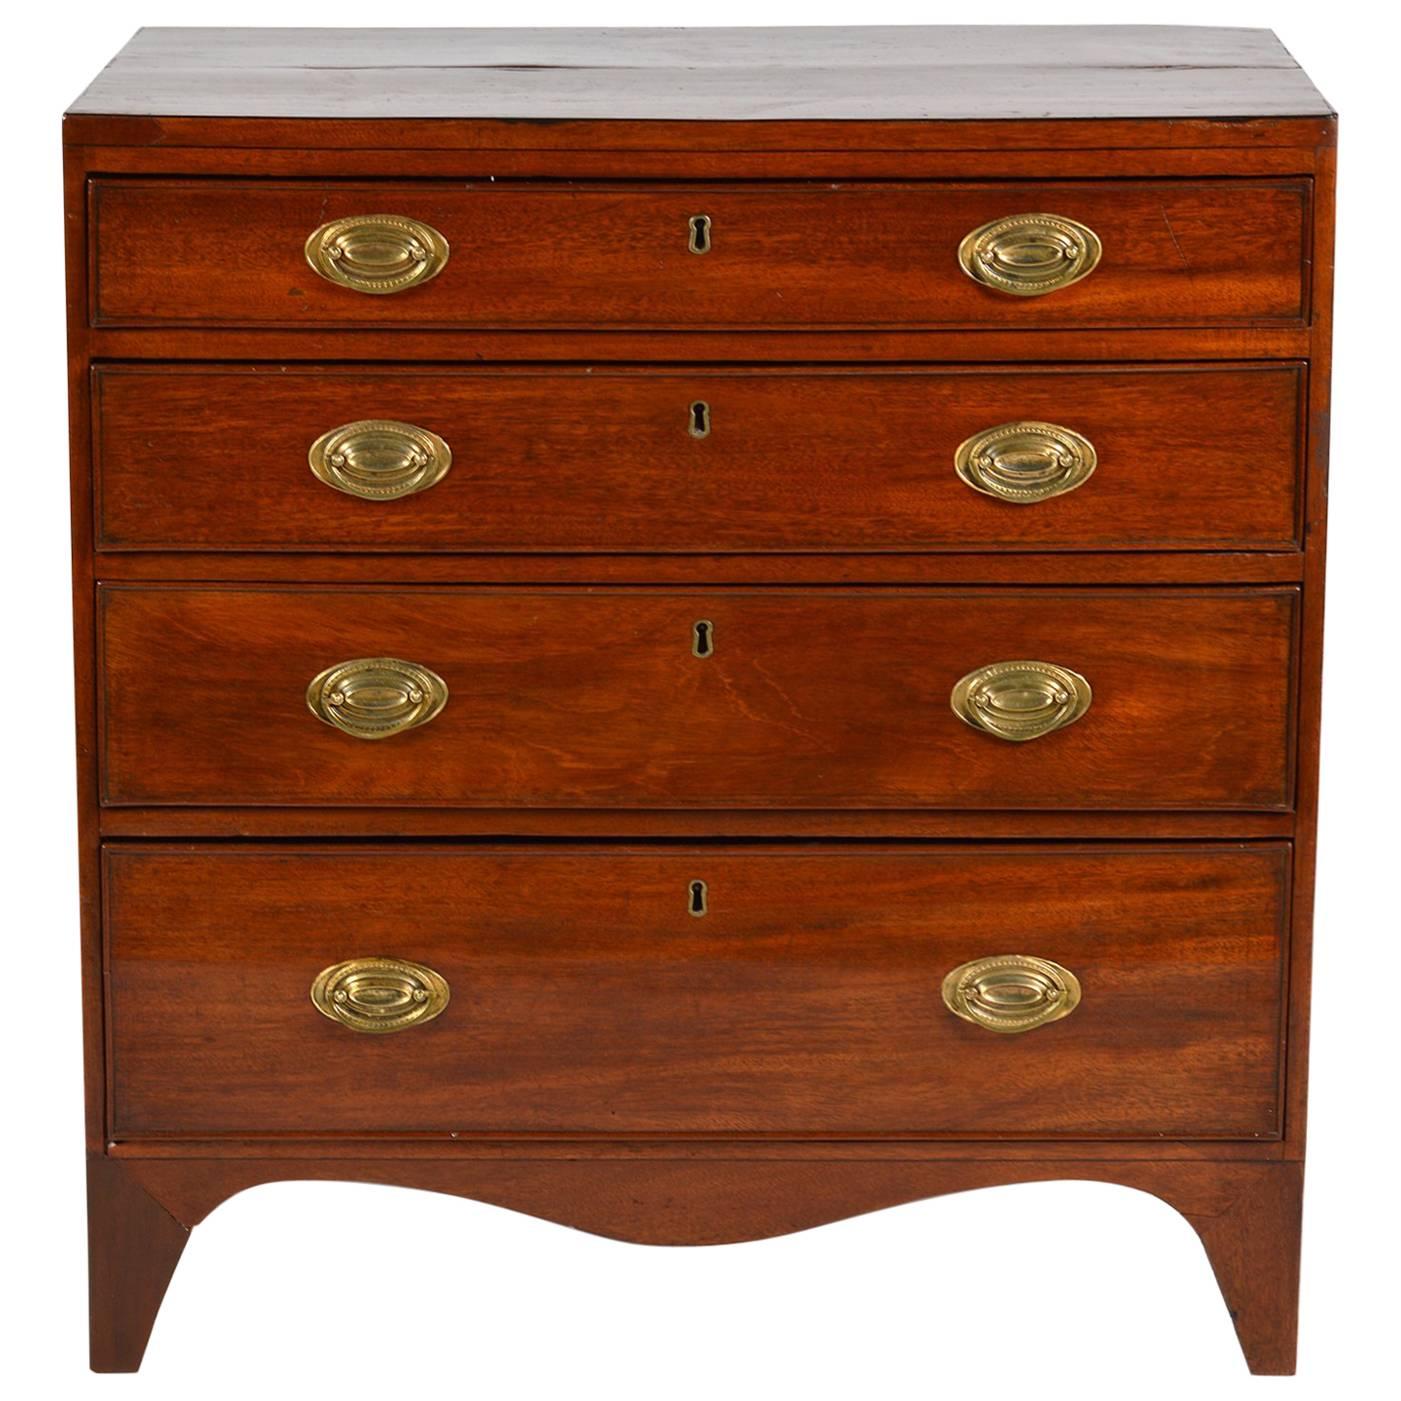 19th Century Georgian Small Size Caddy Top Mahogany Four-Drawer Chest